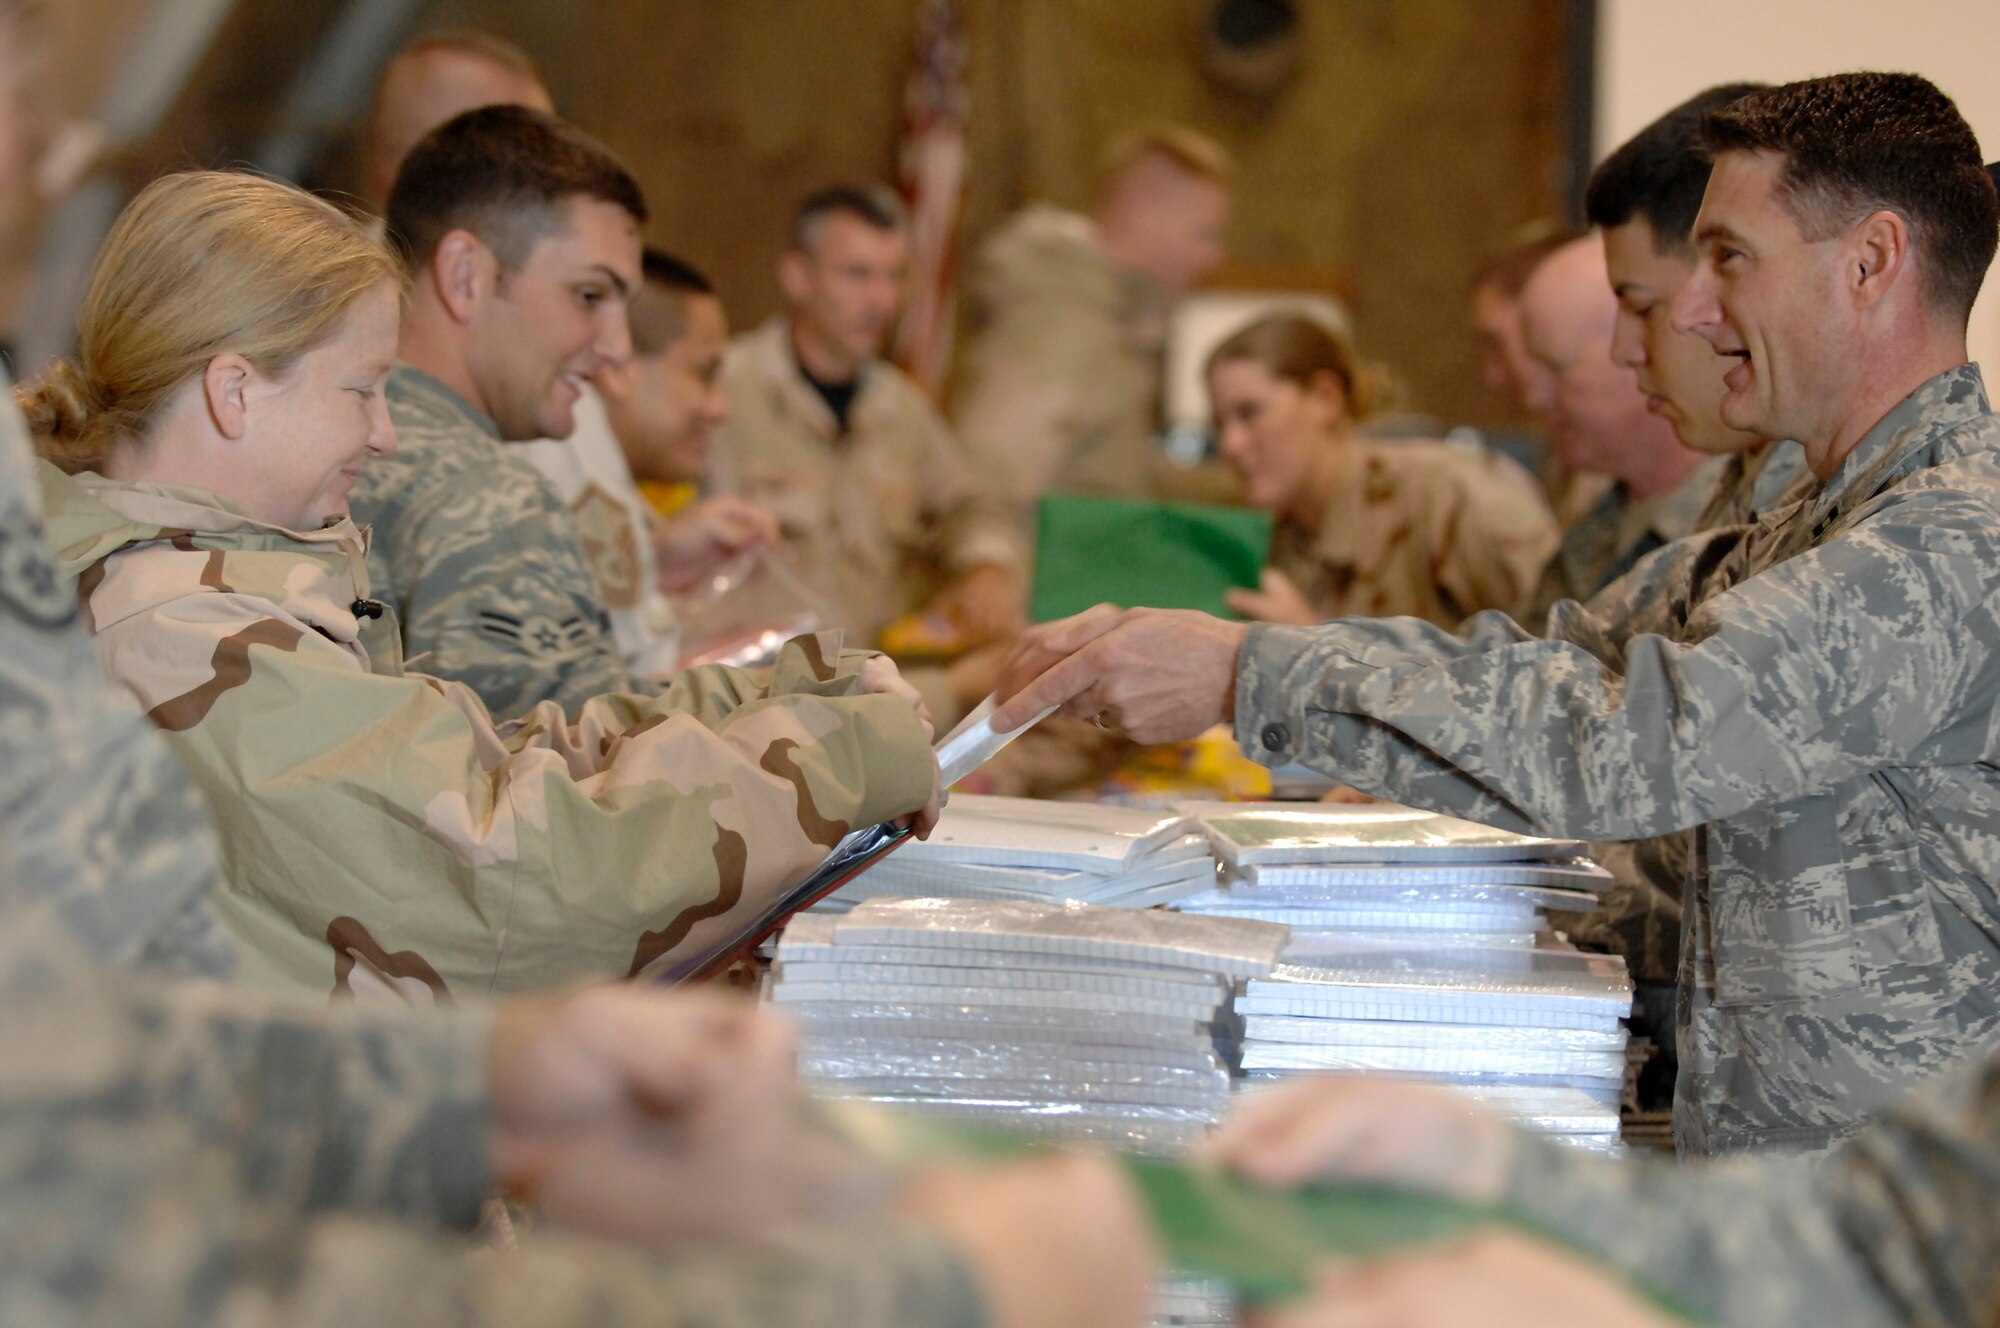 ALI AIR BASE, Iraq -- Chaplain (Capt.) Robert Borger hands out packs of paper Dec. 22 in support of Operation Iraqi Child led by the Focus 5/6 and Top 3 councils. In just over a month, Airmen on base collected thousands of school supply items, soccer balls, stuffed animals and toys from back home. Airmen from across all eight squadrons spent a few hours sorting all the donated items which the office of special investigations will give to Iraqi families in the An Nasiriyah area villages. Chaplain Borger is assigned to the 407th Air Expeditionary Group and is deployed from Hickam Air Force Base, Hawaii. (U.S. Air Force photo/Airman 1st Class Jonathan Snyder)